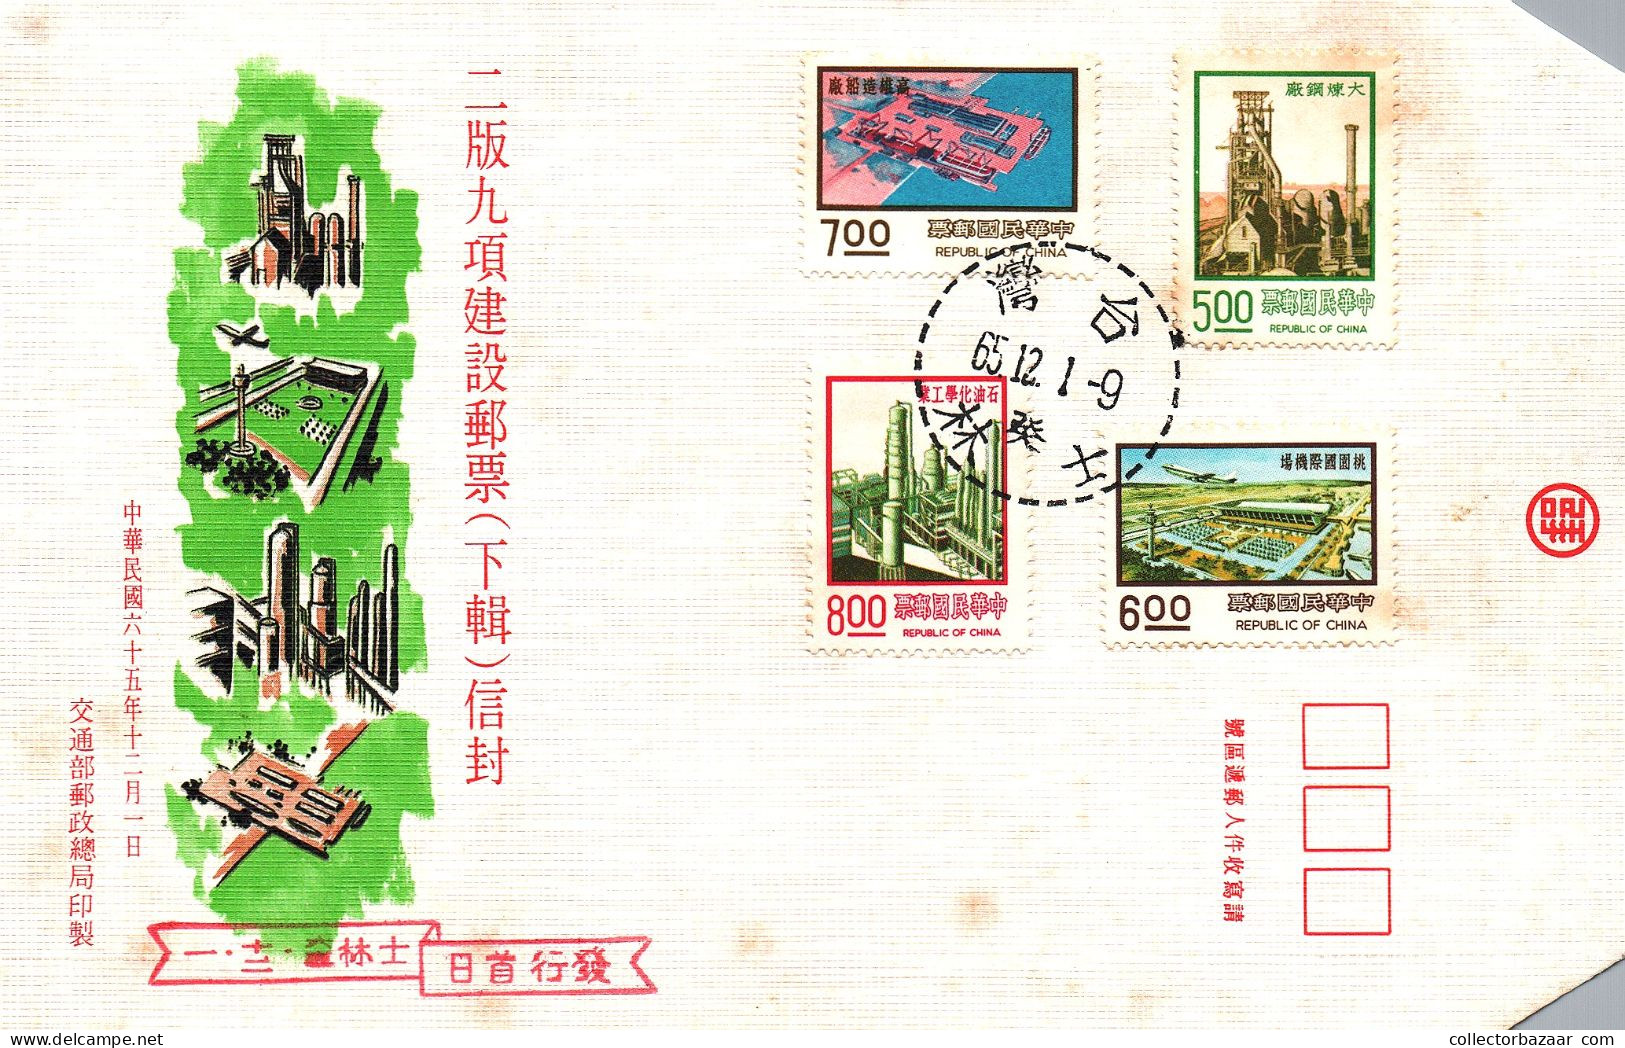 Taiwan Formosa Republic Of China FDC Drawings Evolution Of Airports Industries Factories Port - 8$,7$,6$ And 5$ Stamps - FDC